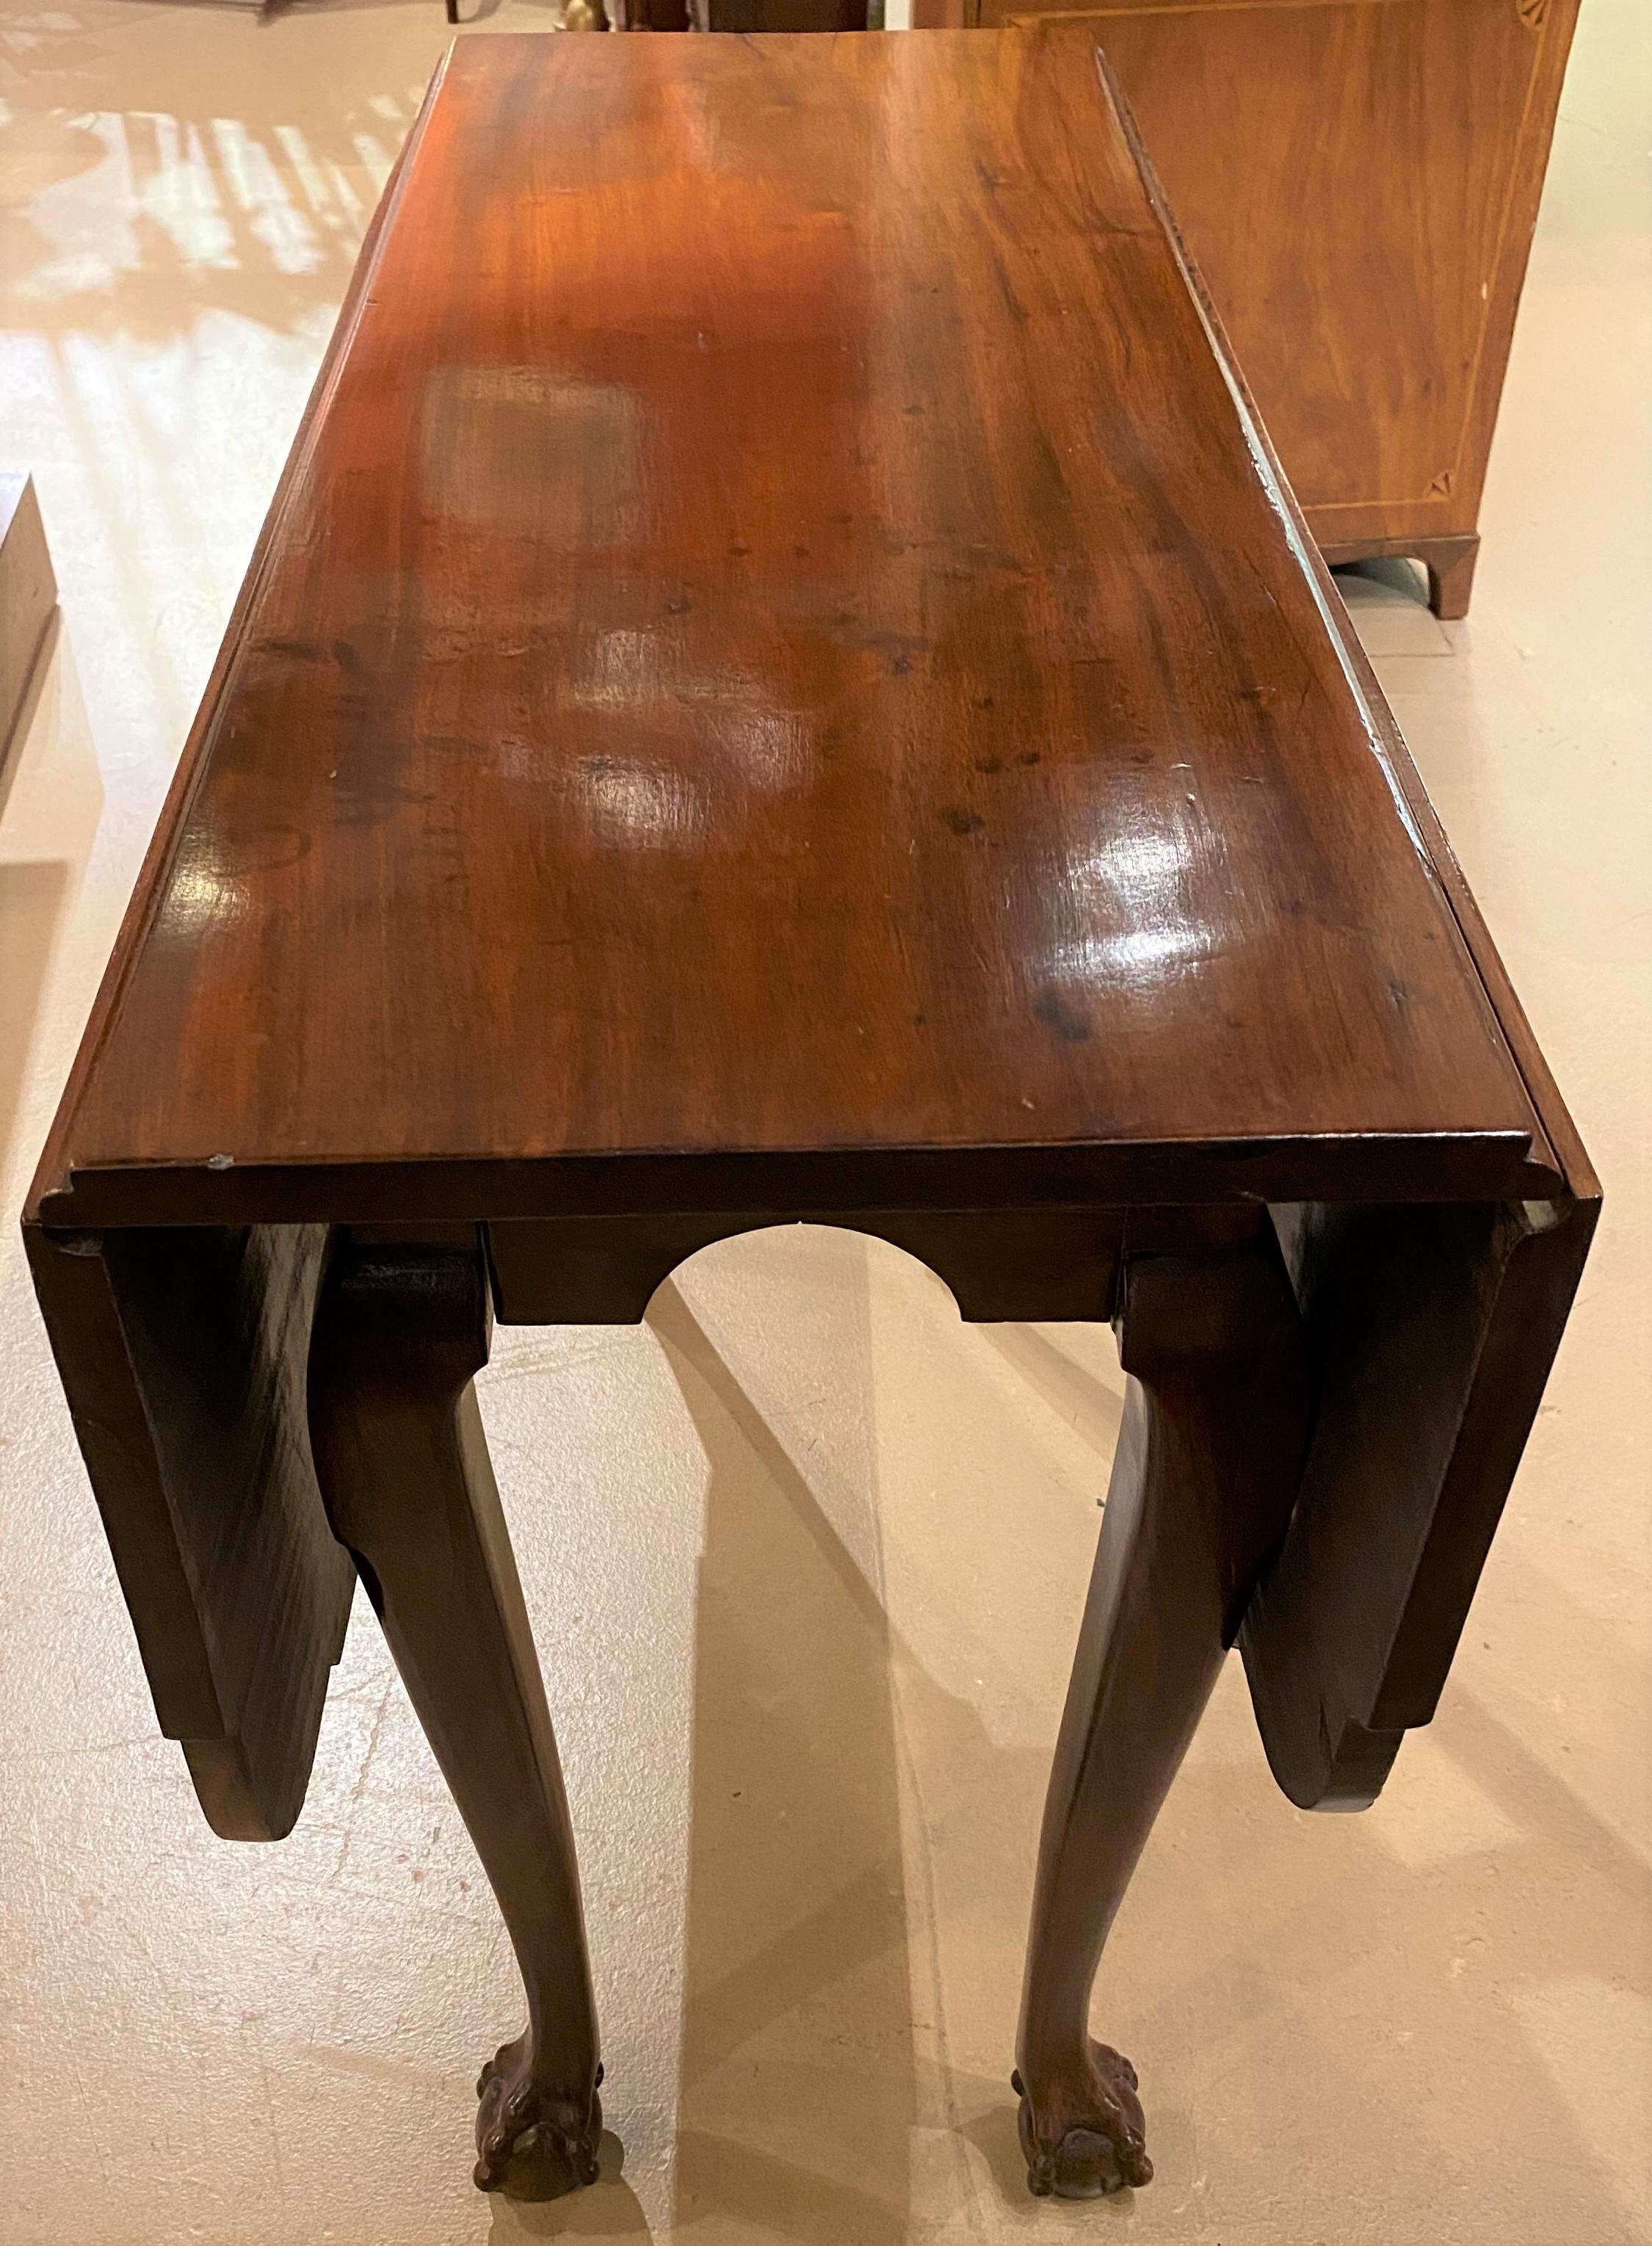 18th Century Massachusetts Mahogany Drop Leaf Table with Ball & Claw Feet For Sale 6